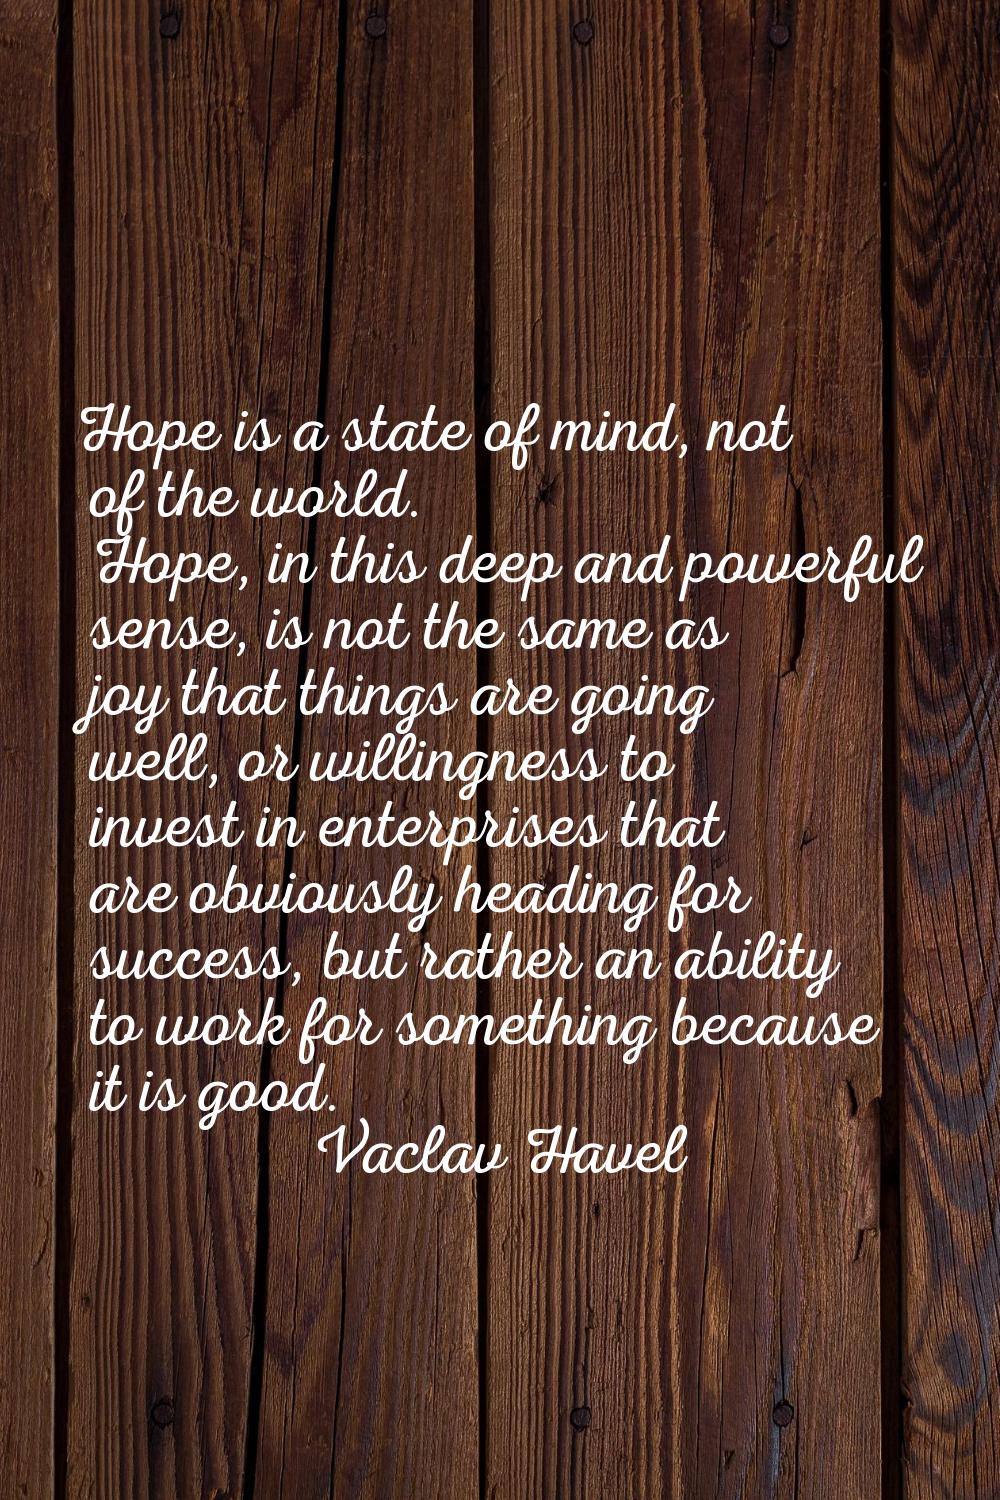 Hope is a state of mind, not of the world. Hope, in this deep and powerful sense, is not the same a